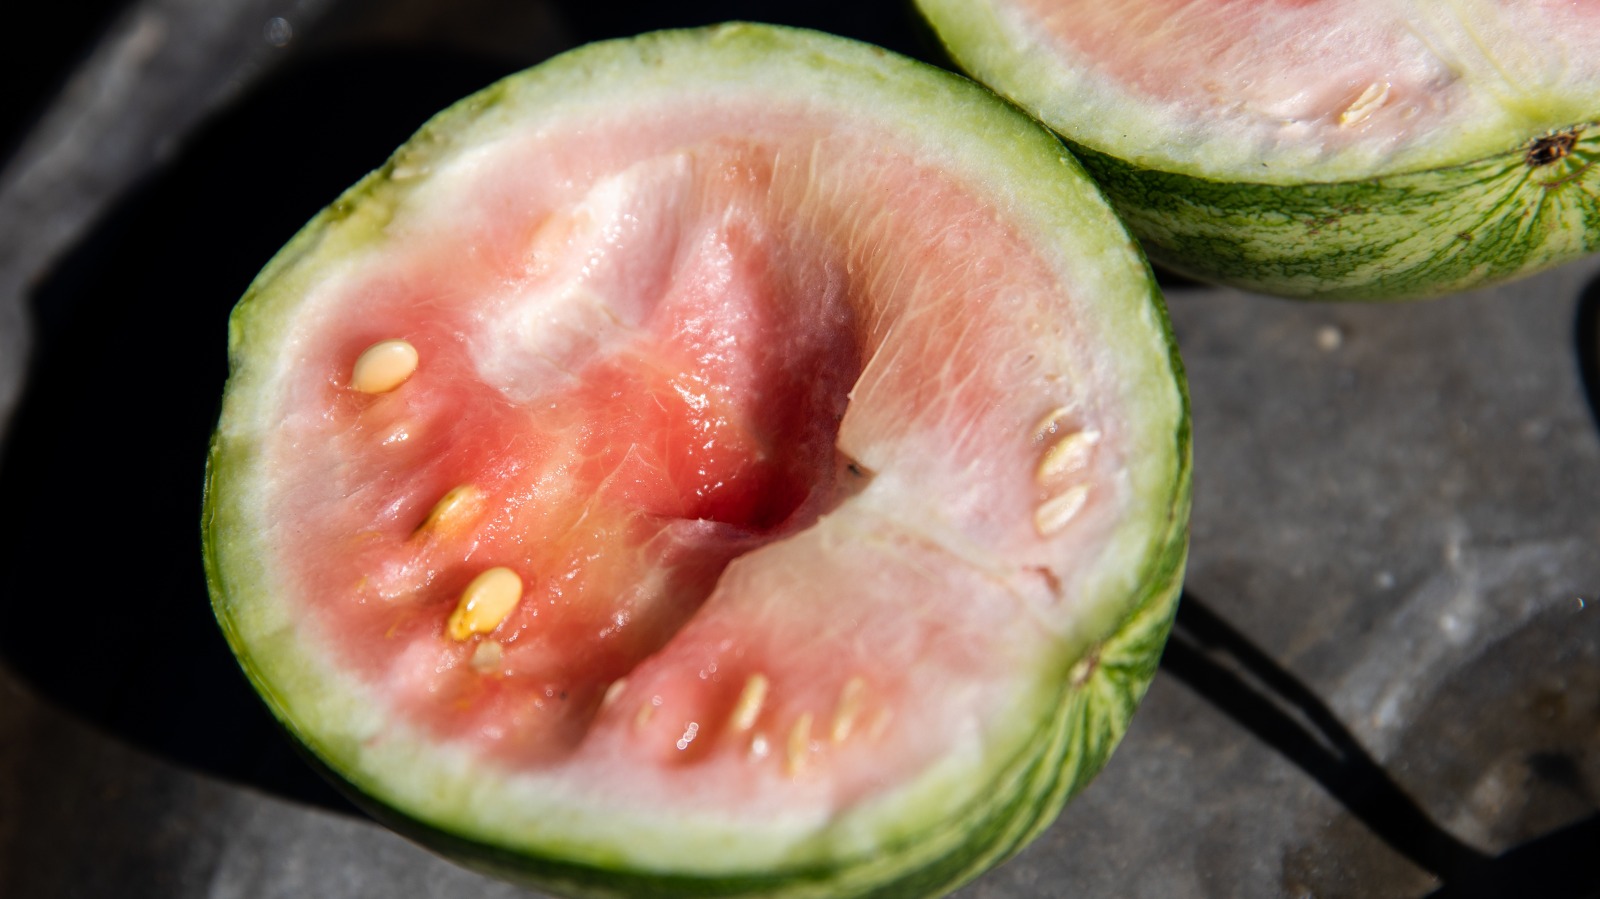 You Should Never Eat Unripe Watermelon. Here's Why